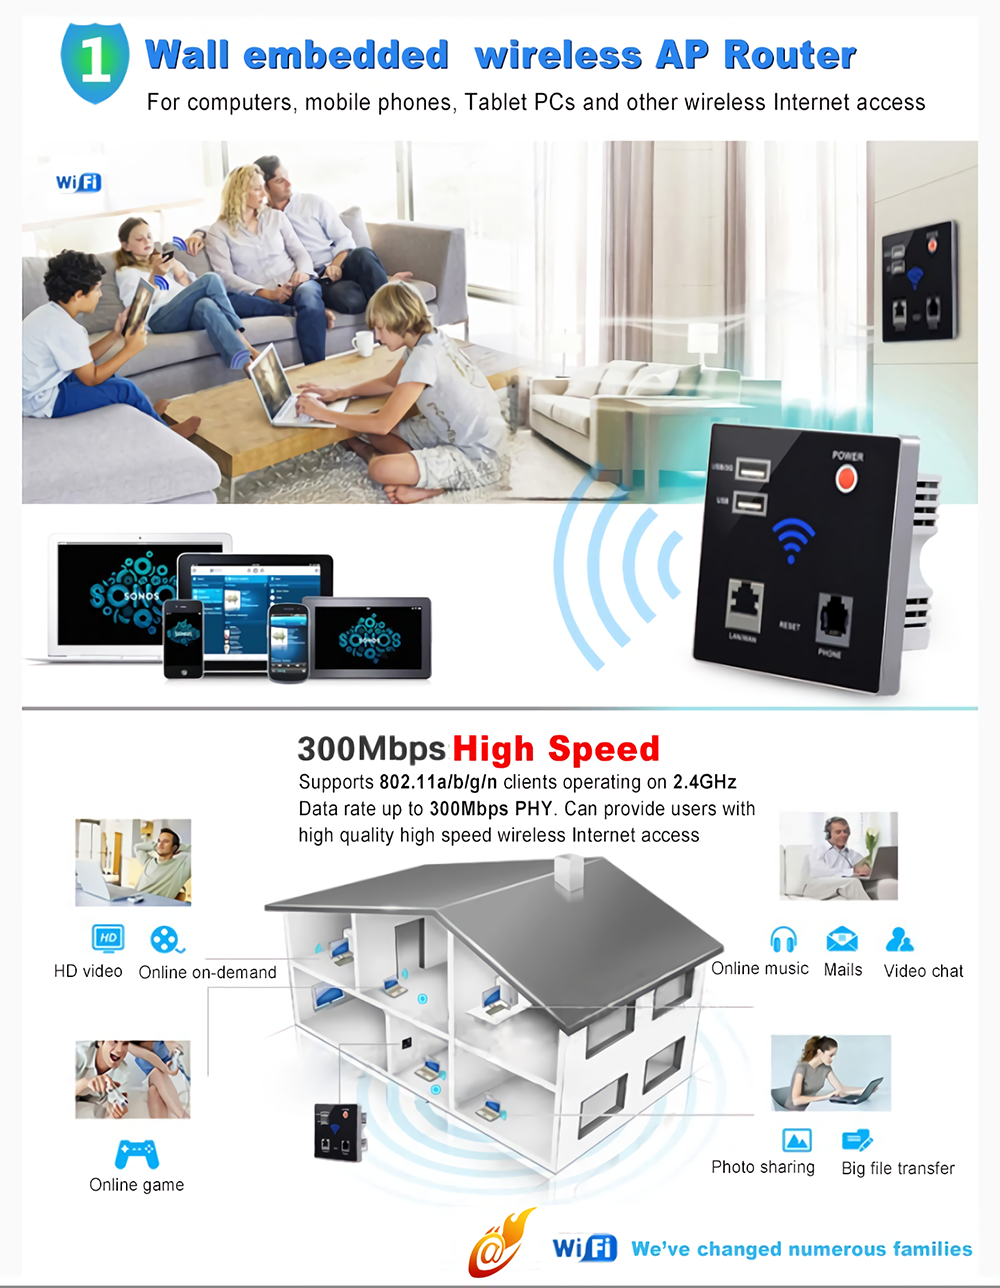 300Mbps-Wifi-Router-Wall-Embedded-Wireless-AP-Repeater-24G-Portable-USB-RJ11-Module-Router-USB-Charg-1837754-1